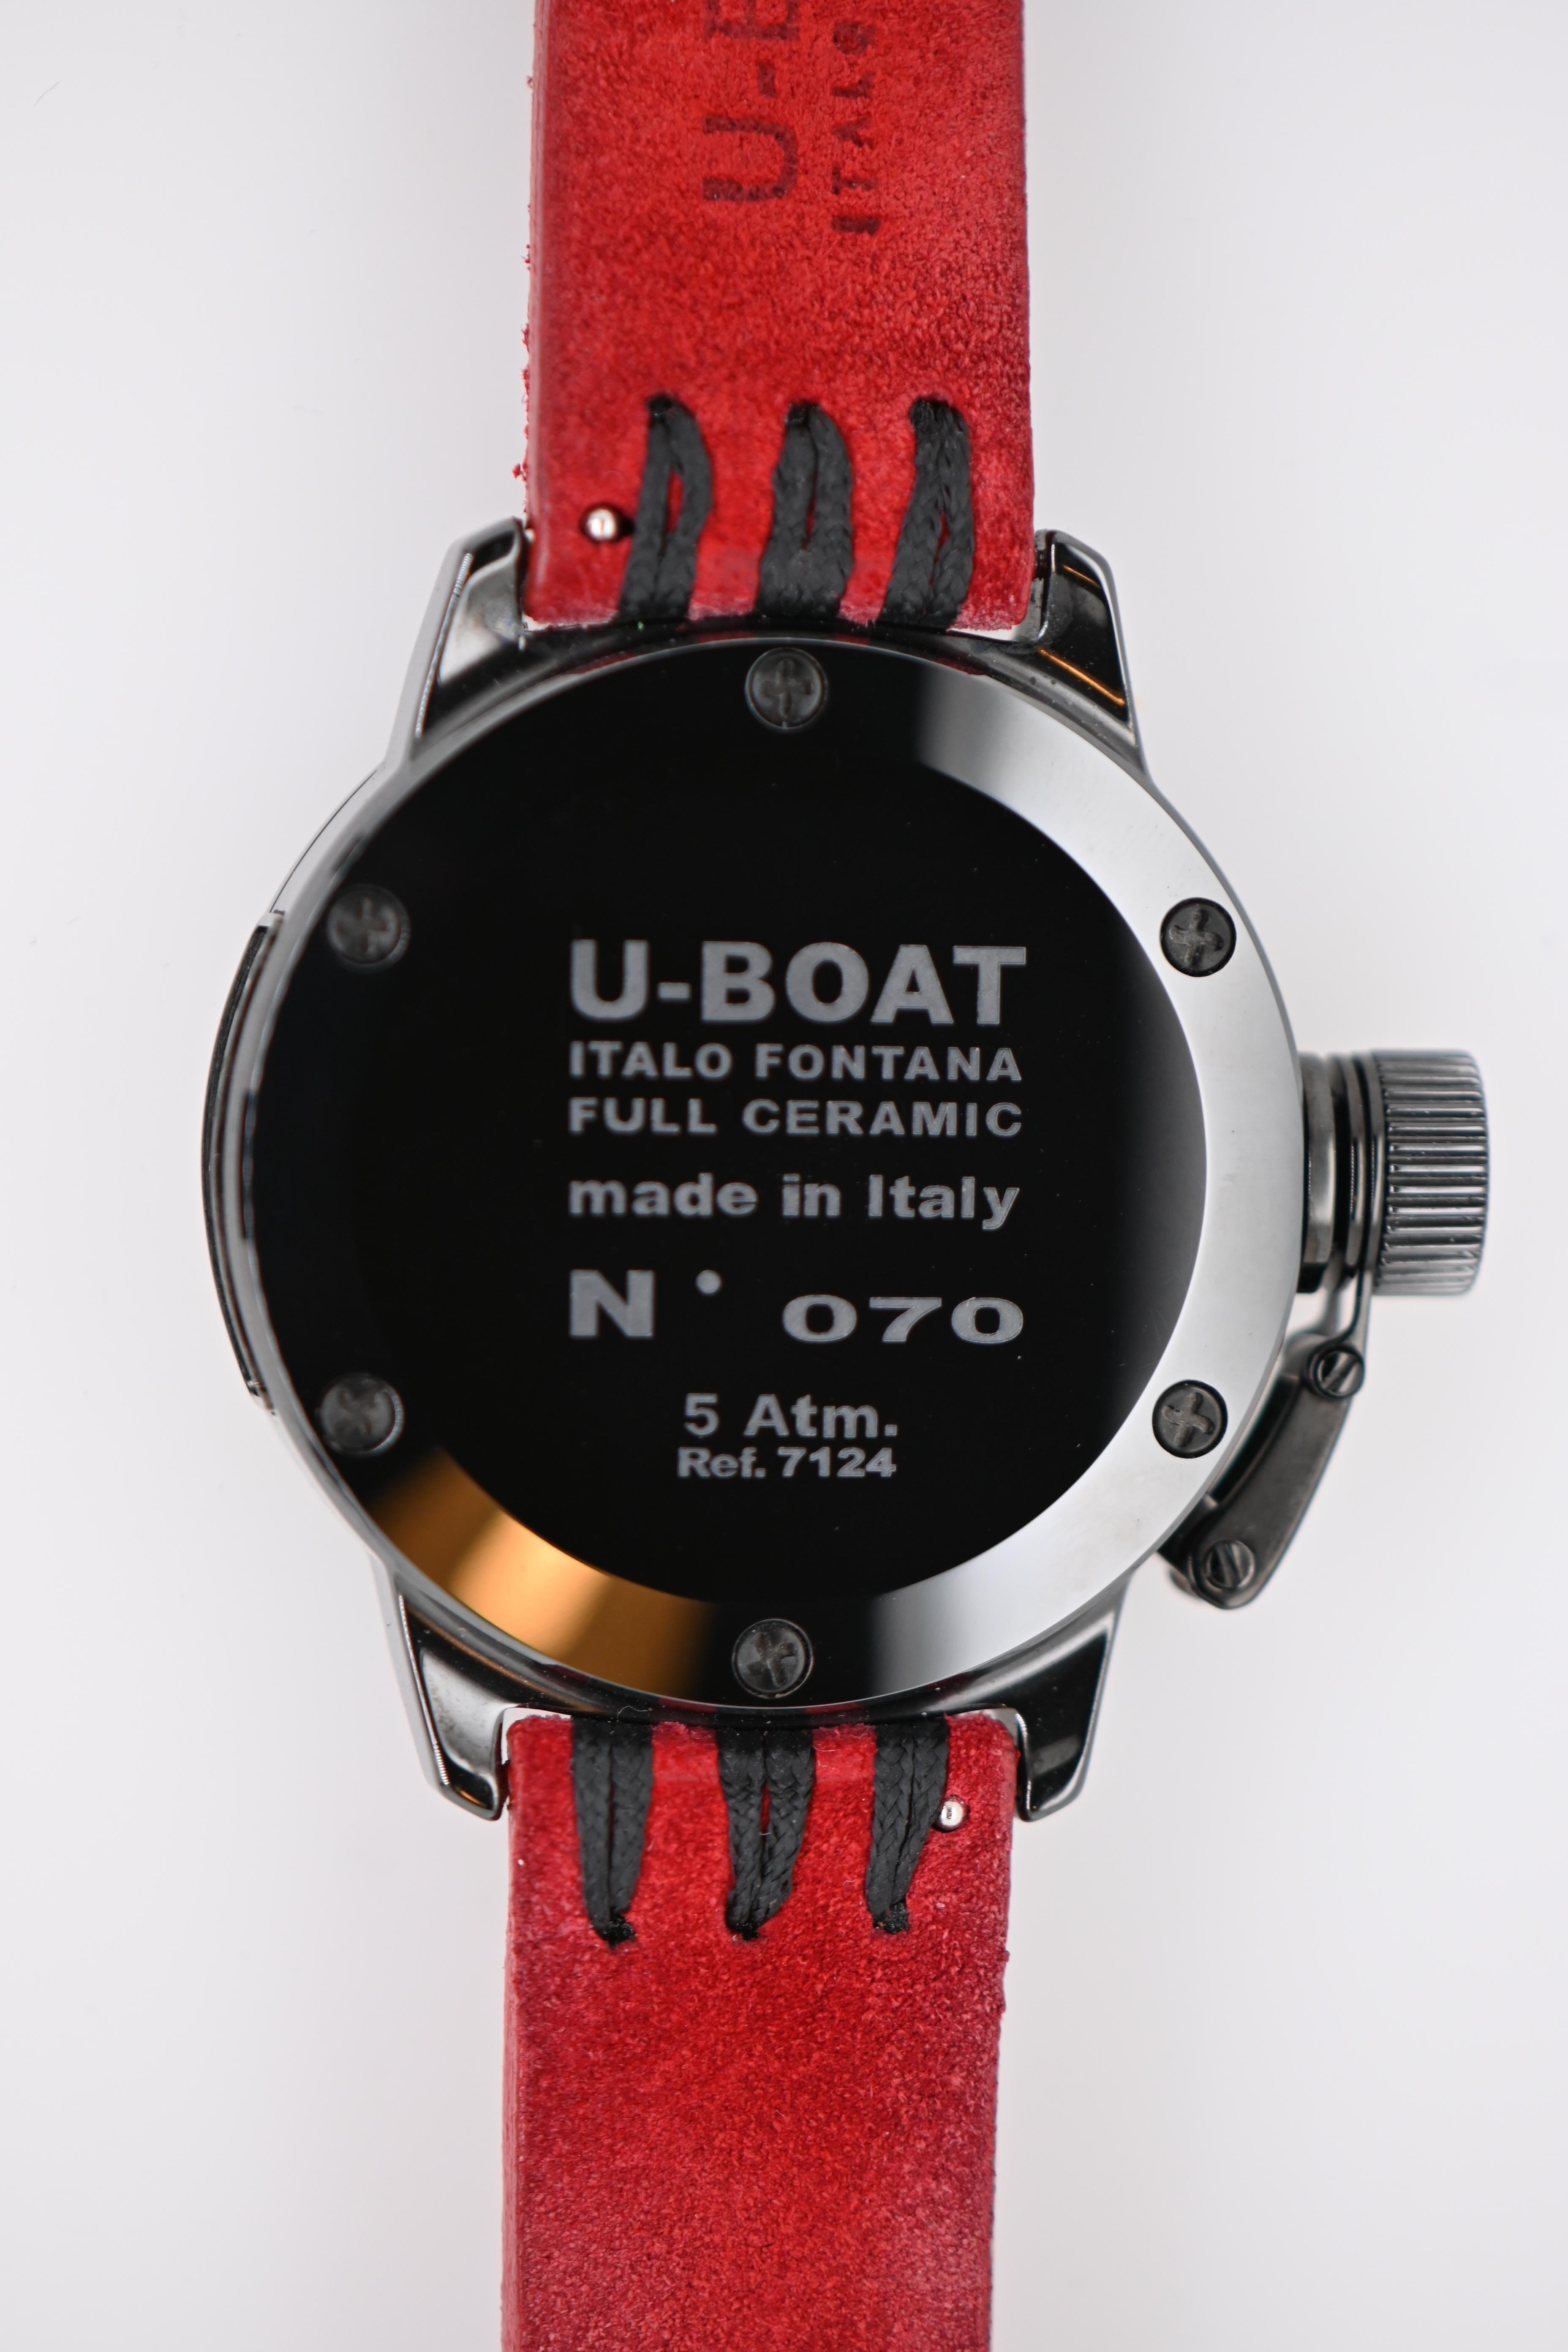 This watch is powered by an automatic movement, which means it's powered by the natural movement of your wrist, eliminating the need for batteries. This gives you a hassle-free watchmaking experience and remarkable precision.

The U-Boat Ceramic 42